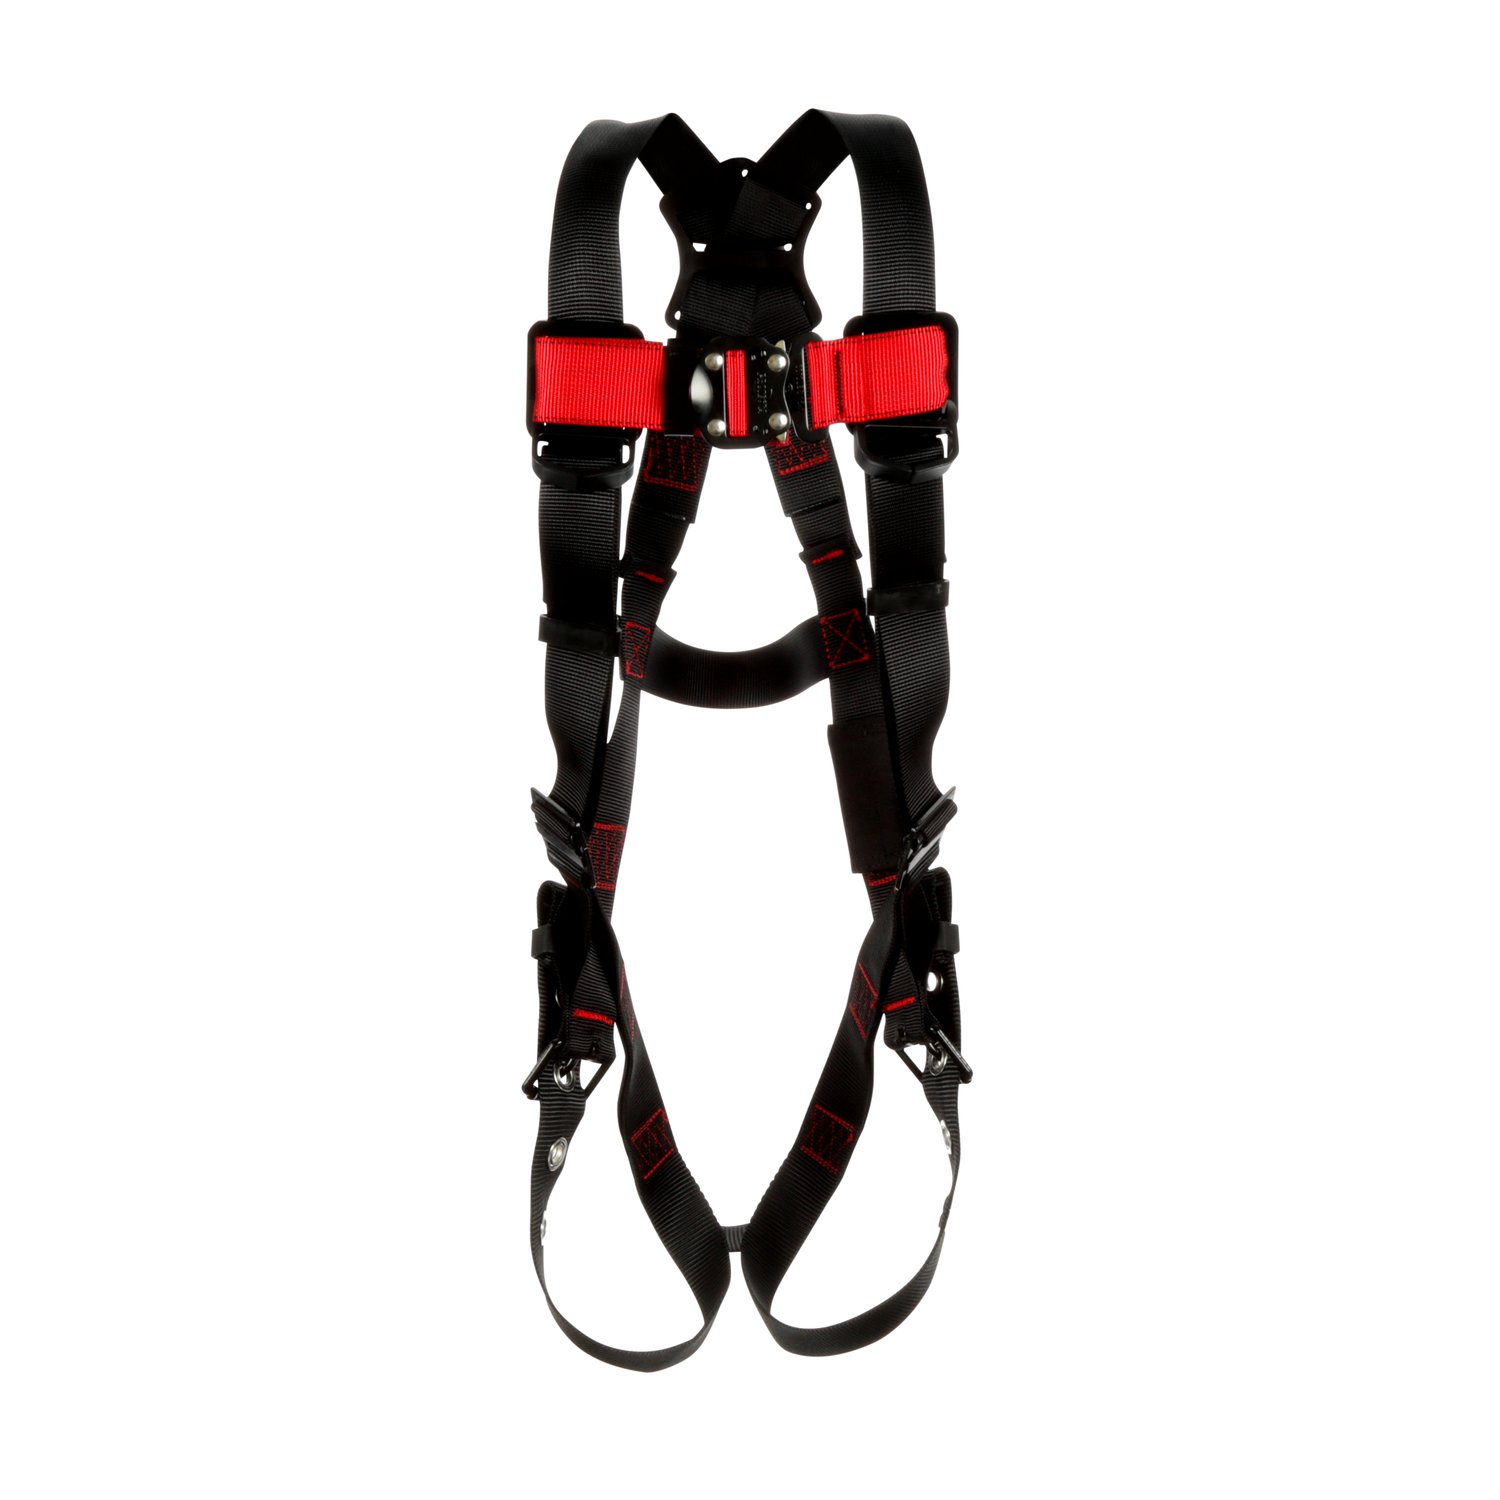 7100184601 - 3M Protecta P200 Vest Safety Harness 1161505, 3X